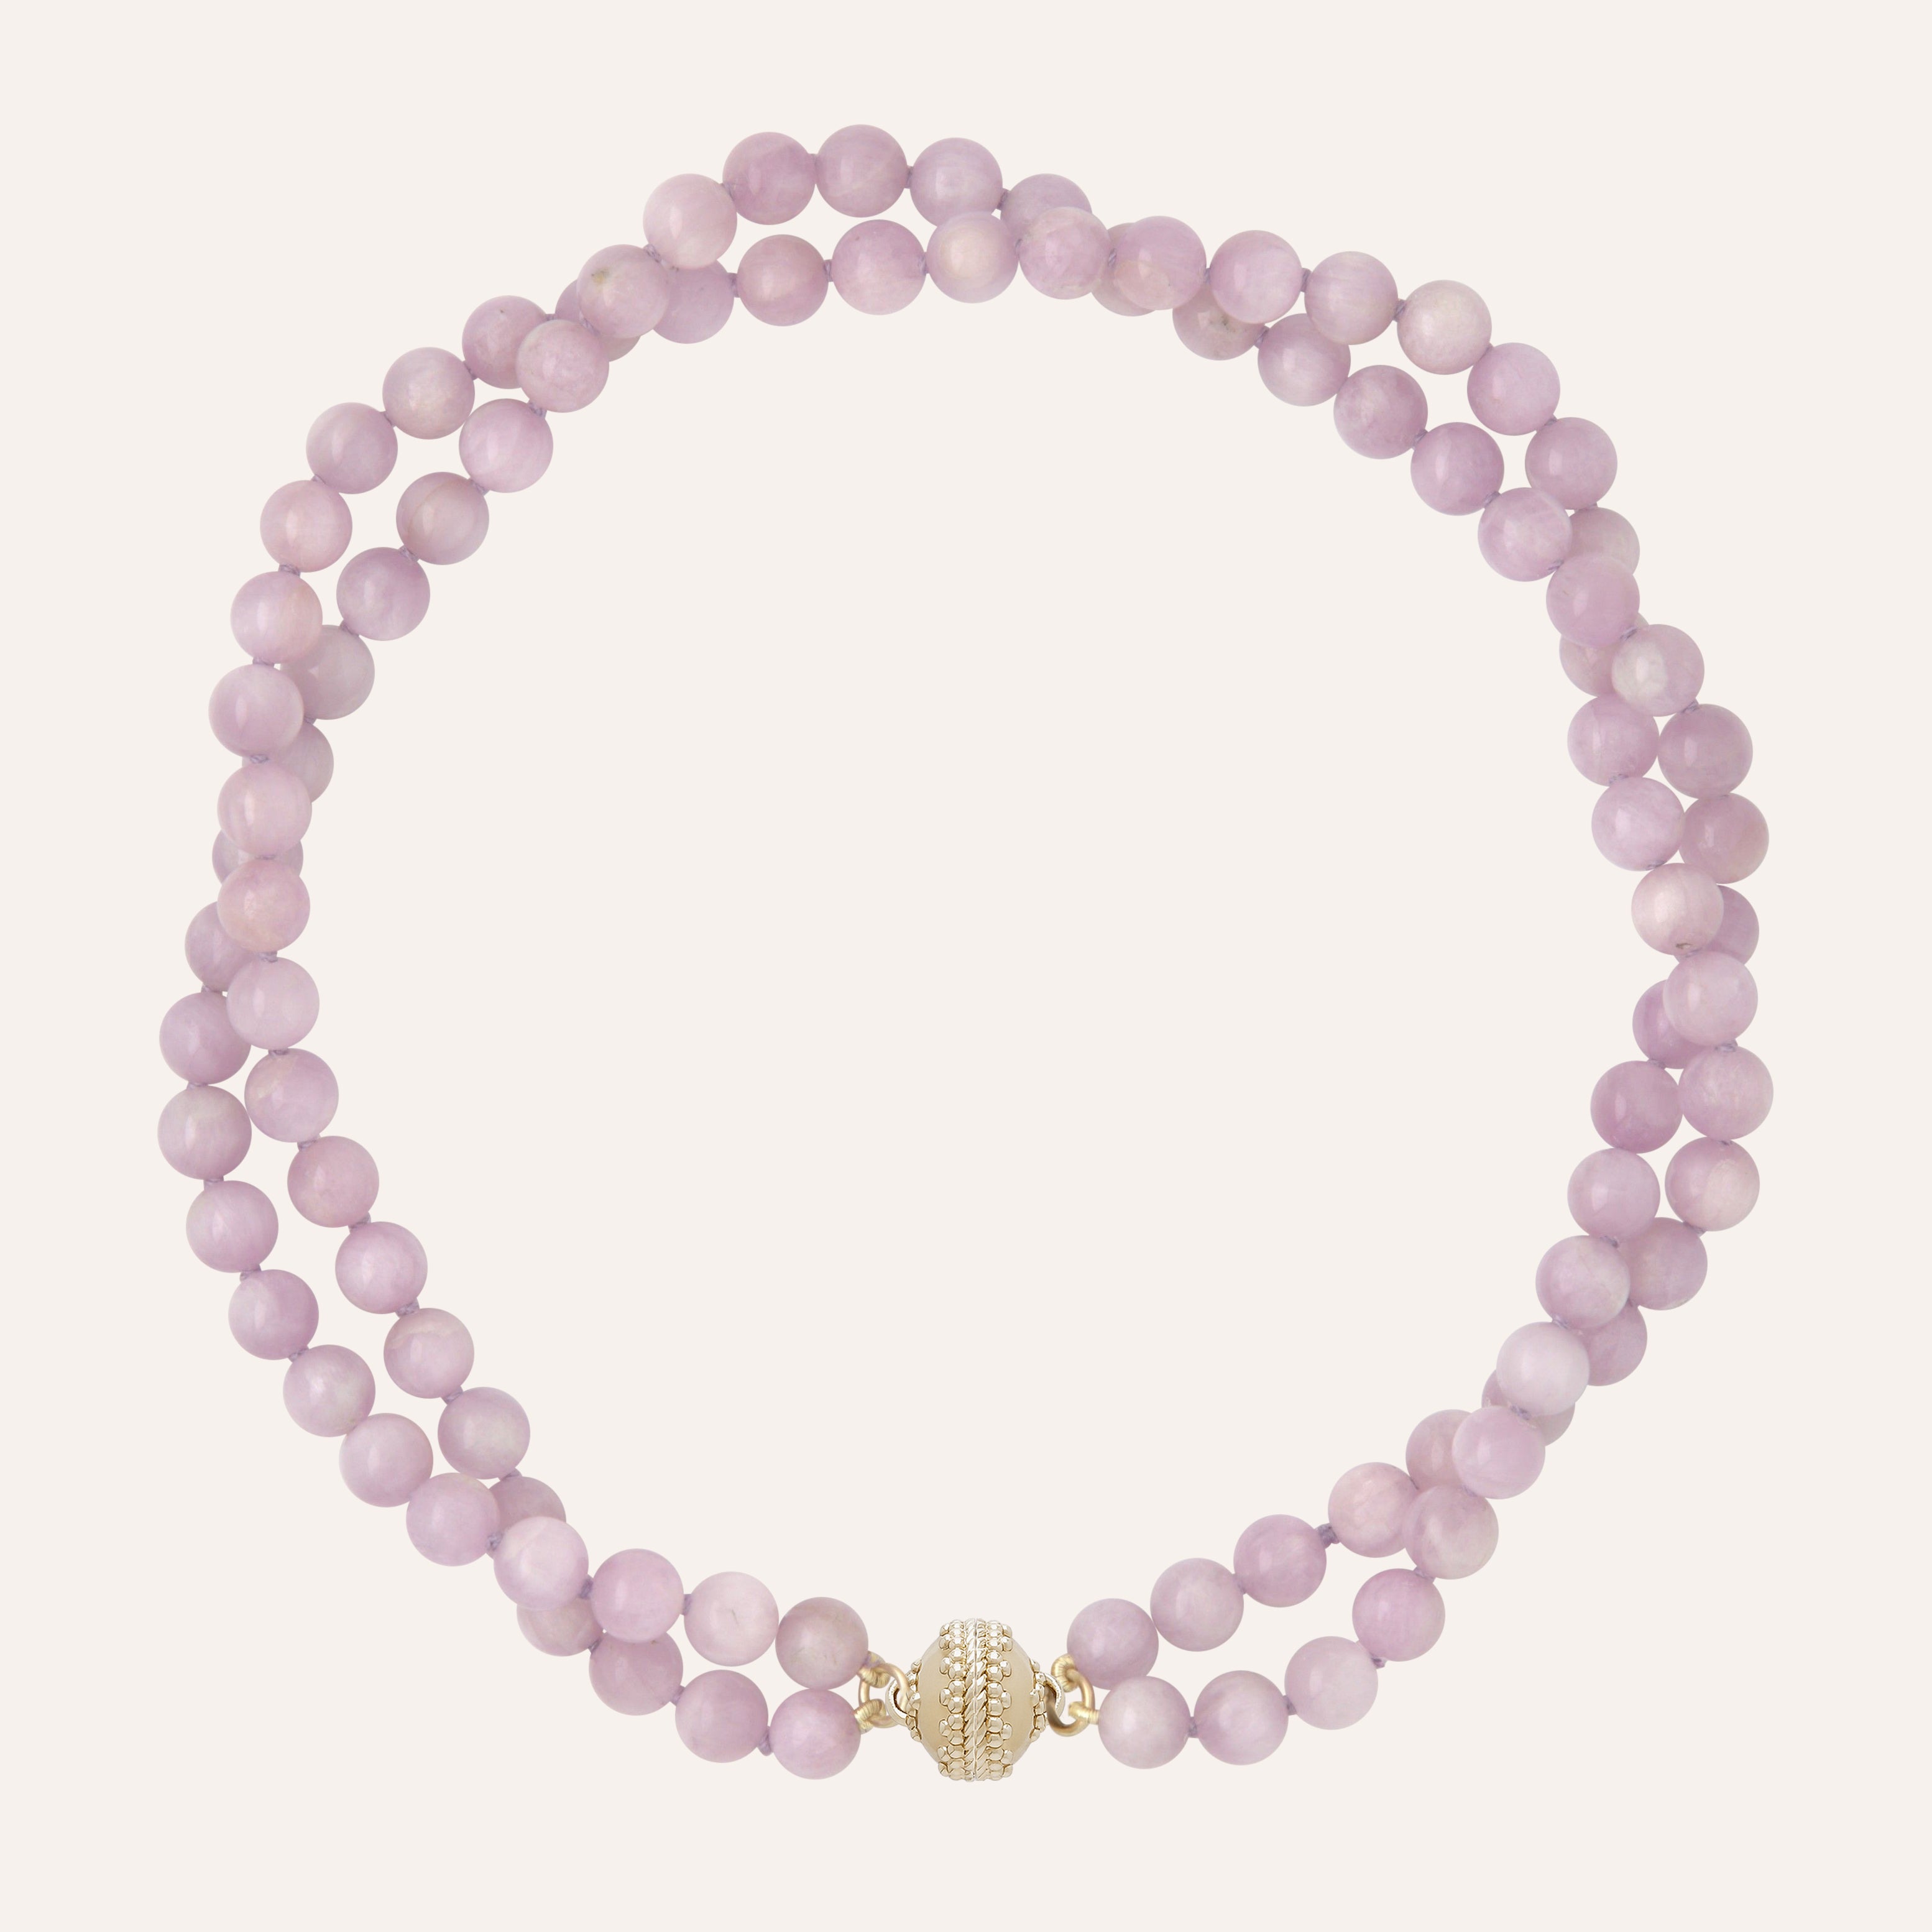 Victoire Pink Kunzite 8mm Double Strand Necklace